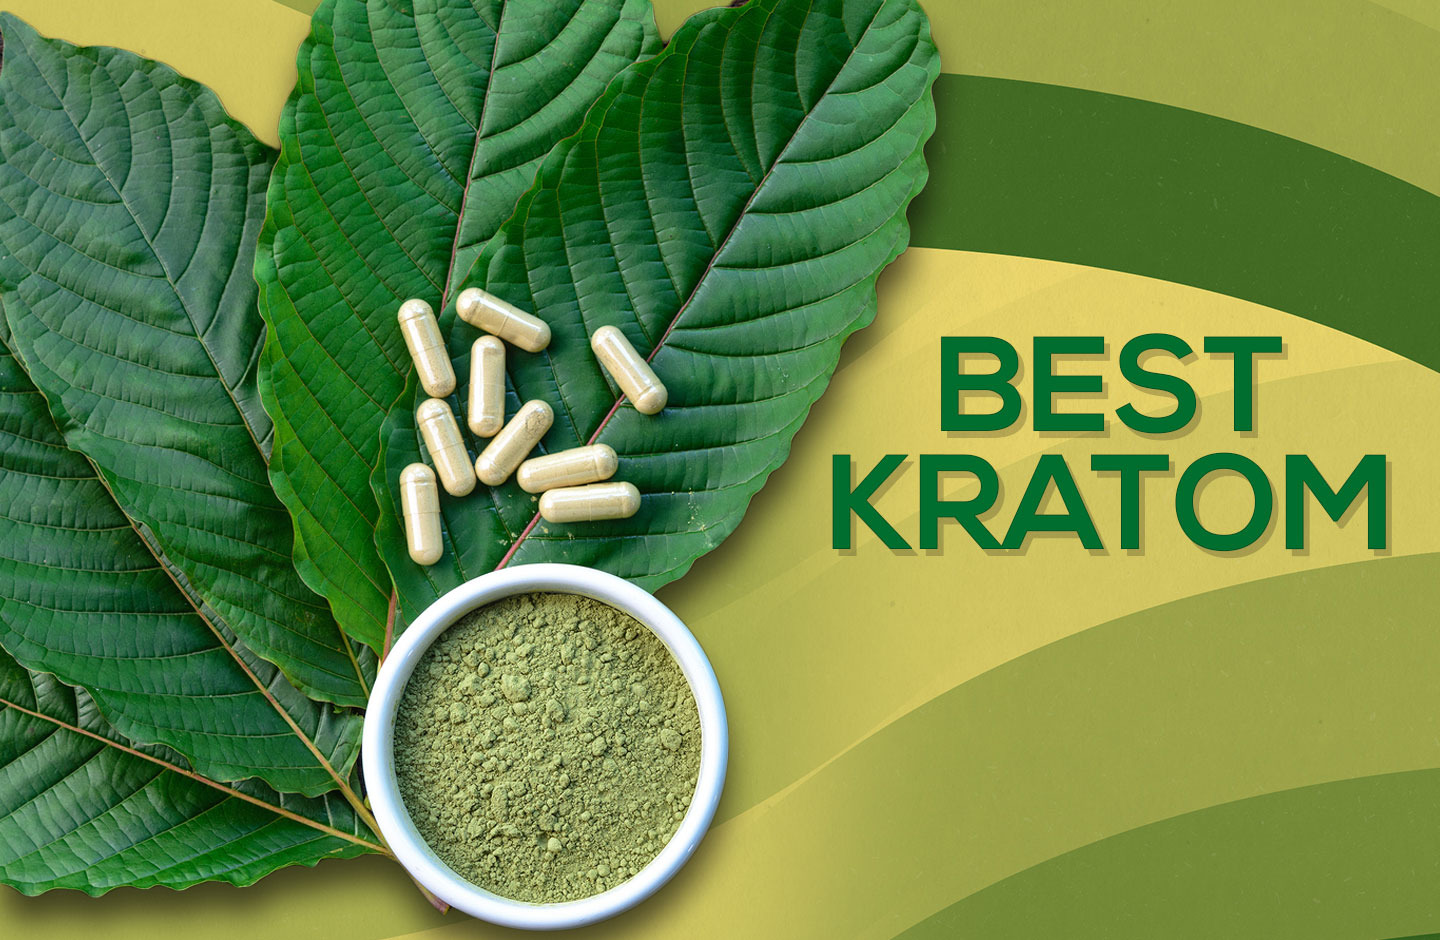 Different presentations of Kratom, leafs, capsules and powder.